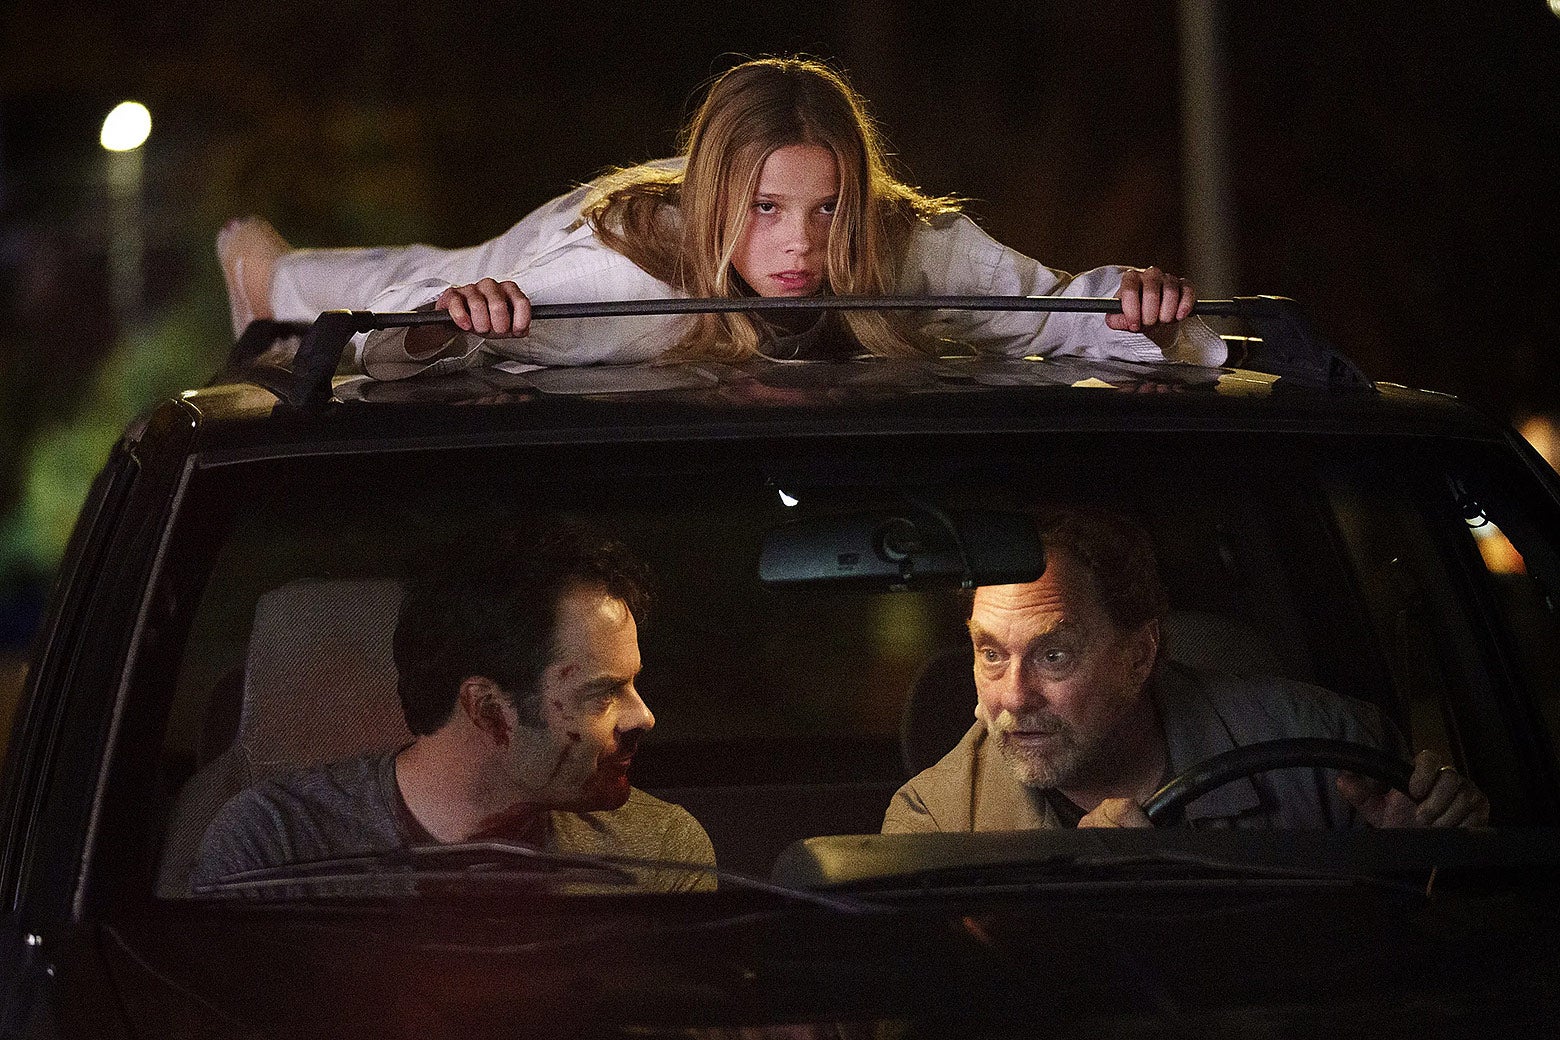 Barry and Ron sit inside a car, while a young girl in a white shirt perches atop it.